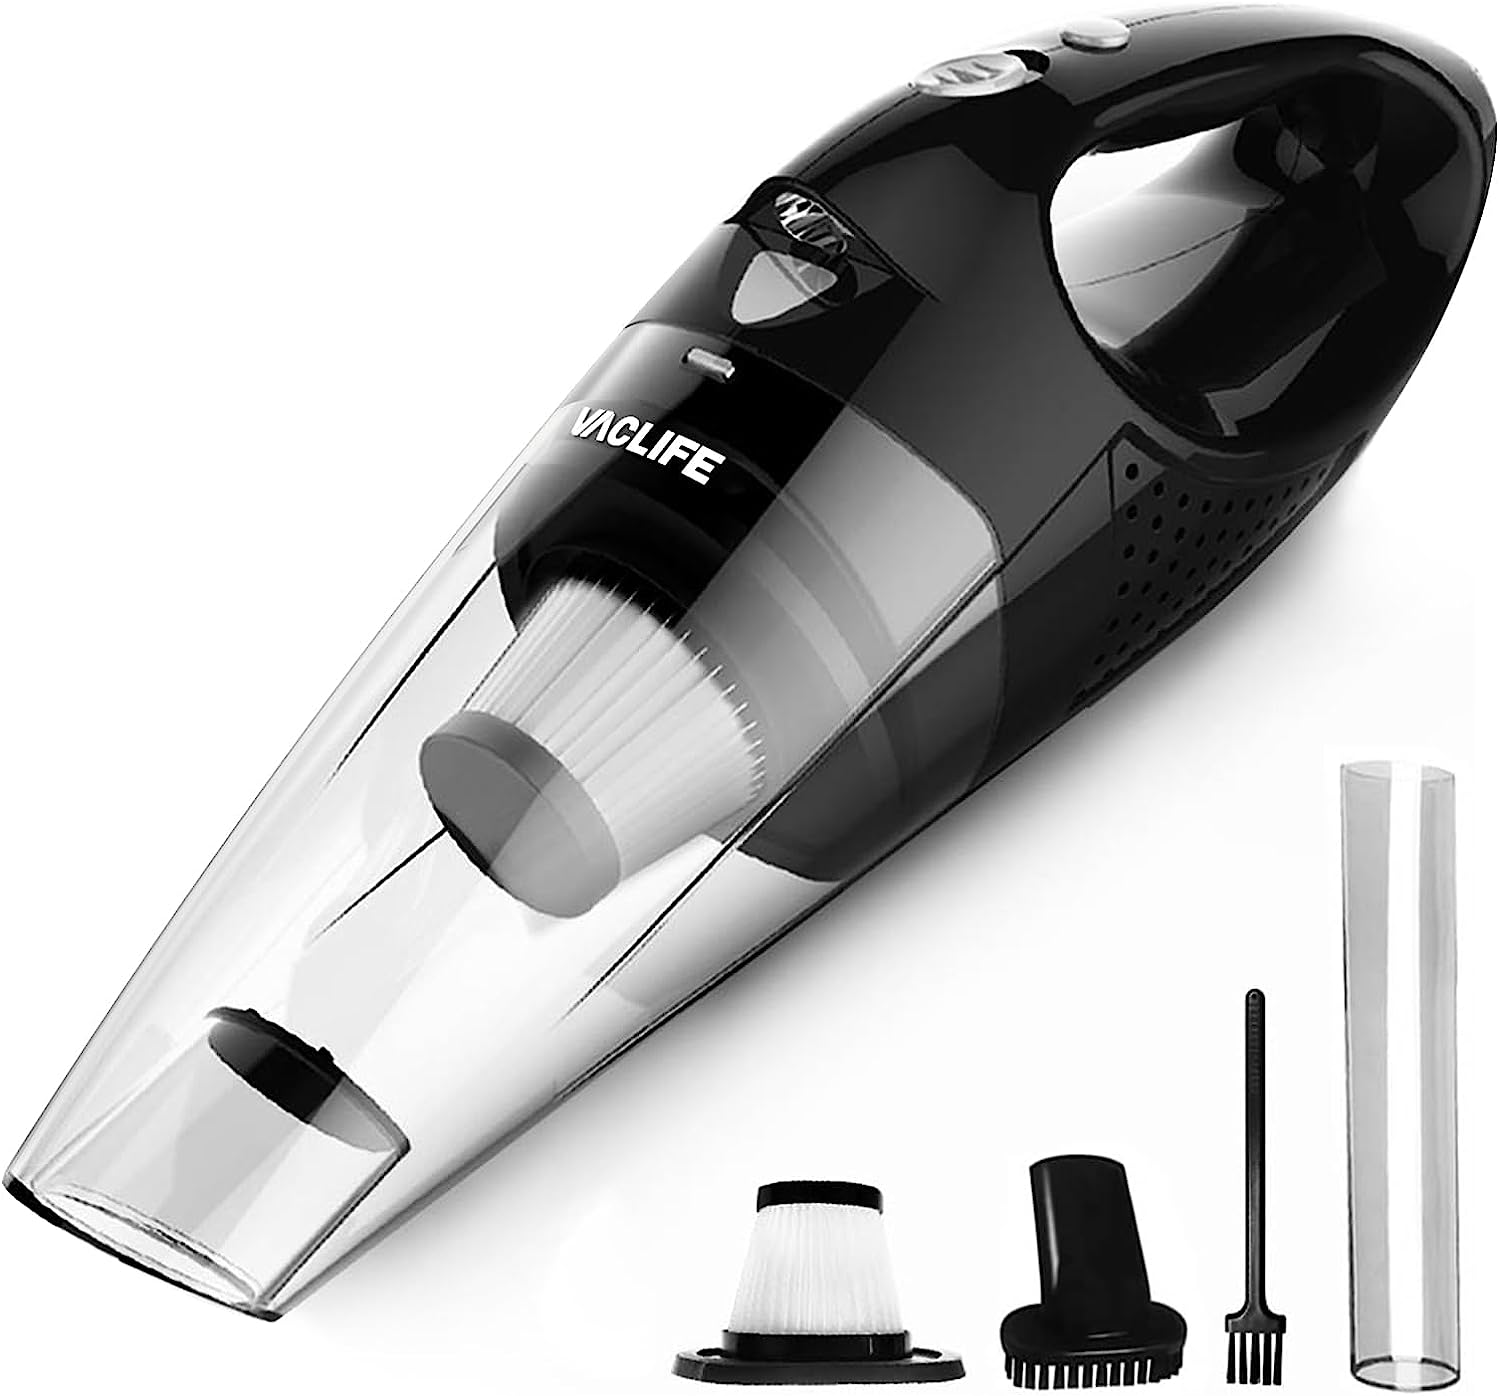 VacLife Cordless Vacuum Cleaner for Home, Rechargeable Stick Vacuum with  Strong Suction for Pet Hair, Carpet and Hard Floor, 45-min Max Runtime,  Black